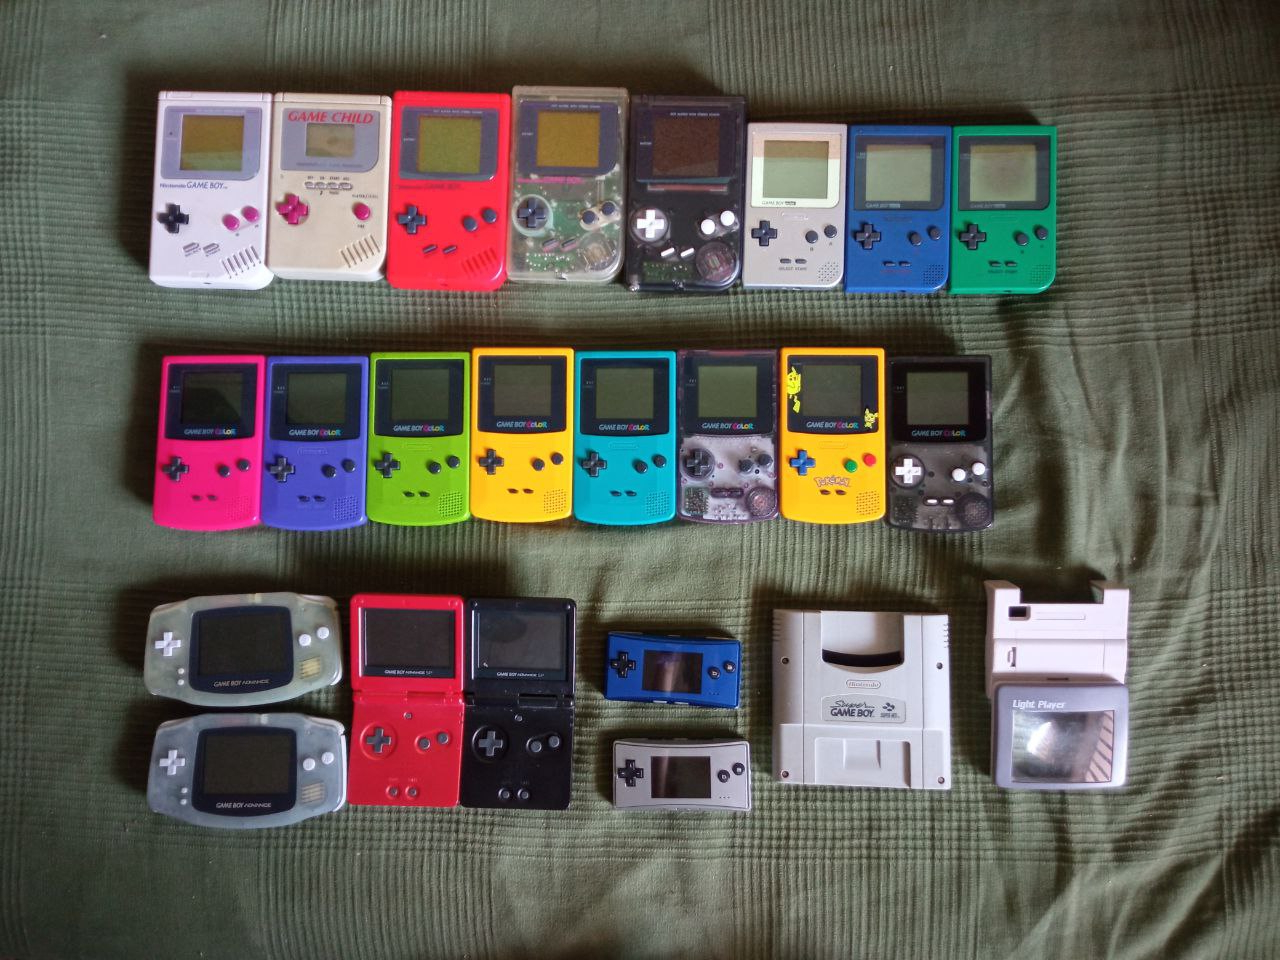 Picture with many Game Boy consoles and accessories